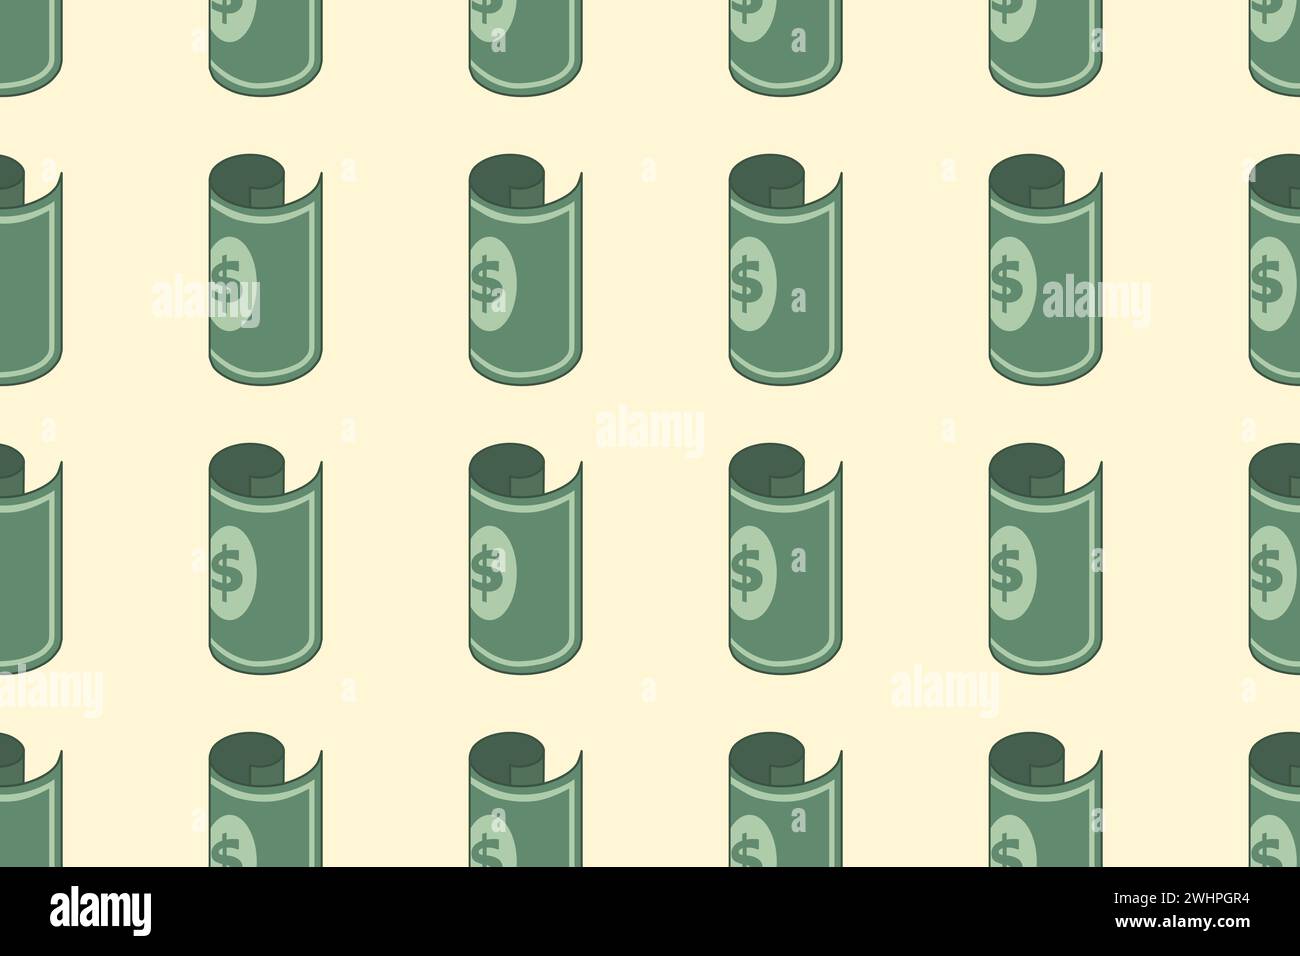 Roll of money seamless pattern. Background with green banknotes and dollar bills. Template for packing, design, wallpaper, vector illustration. Stock Vector